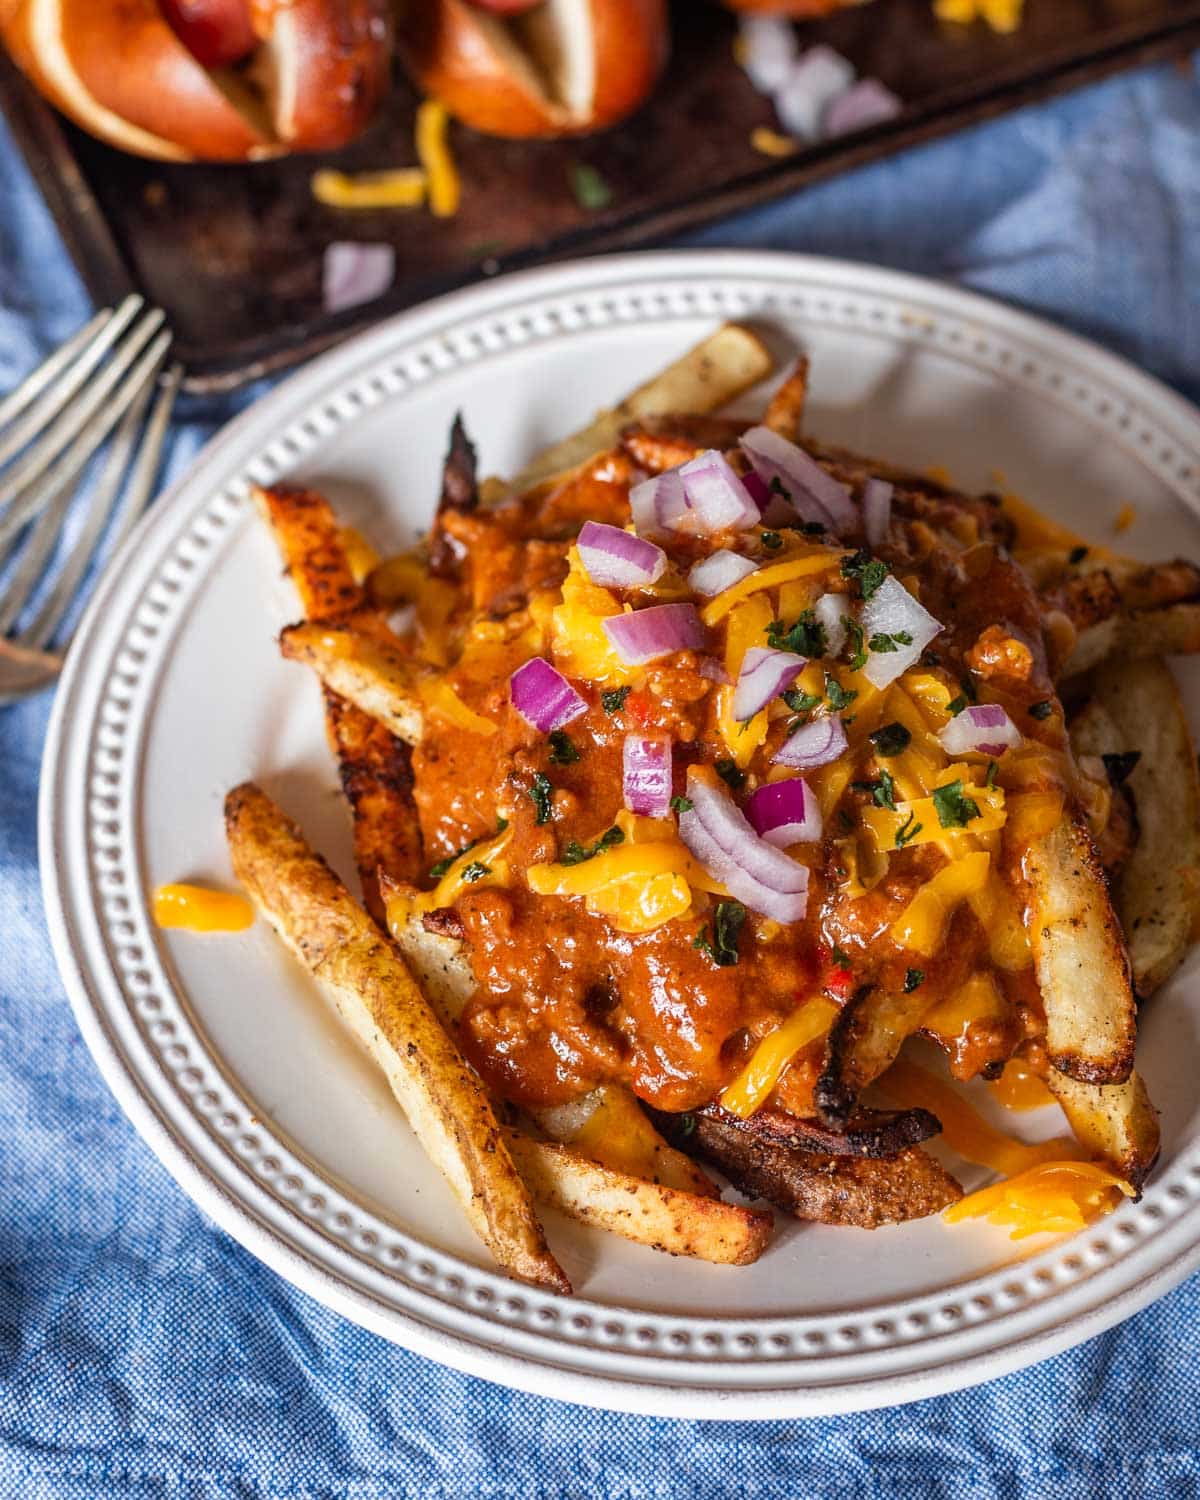 loaded french fries with chili sauce and cheese